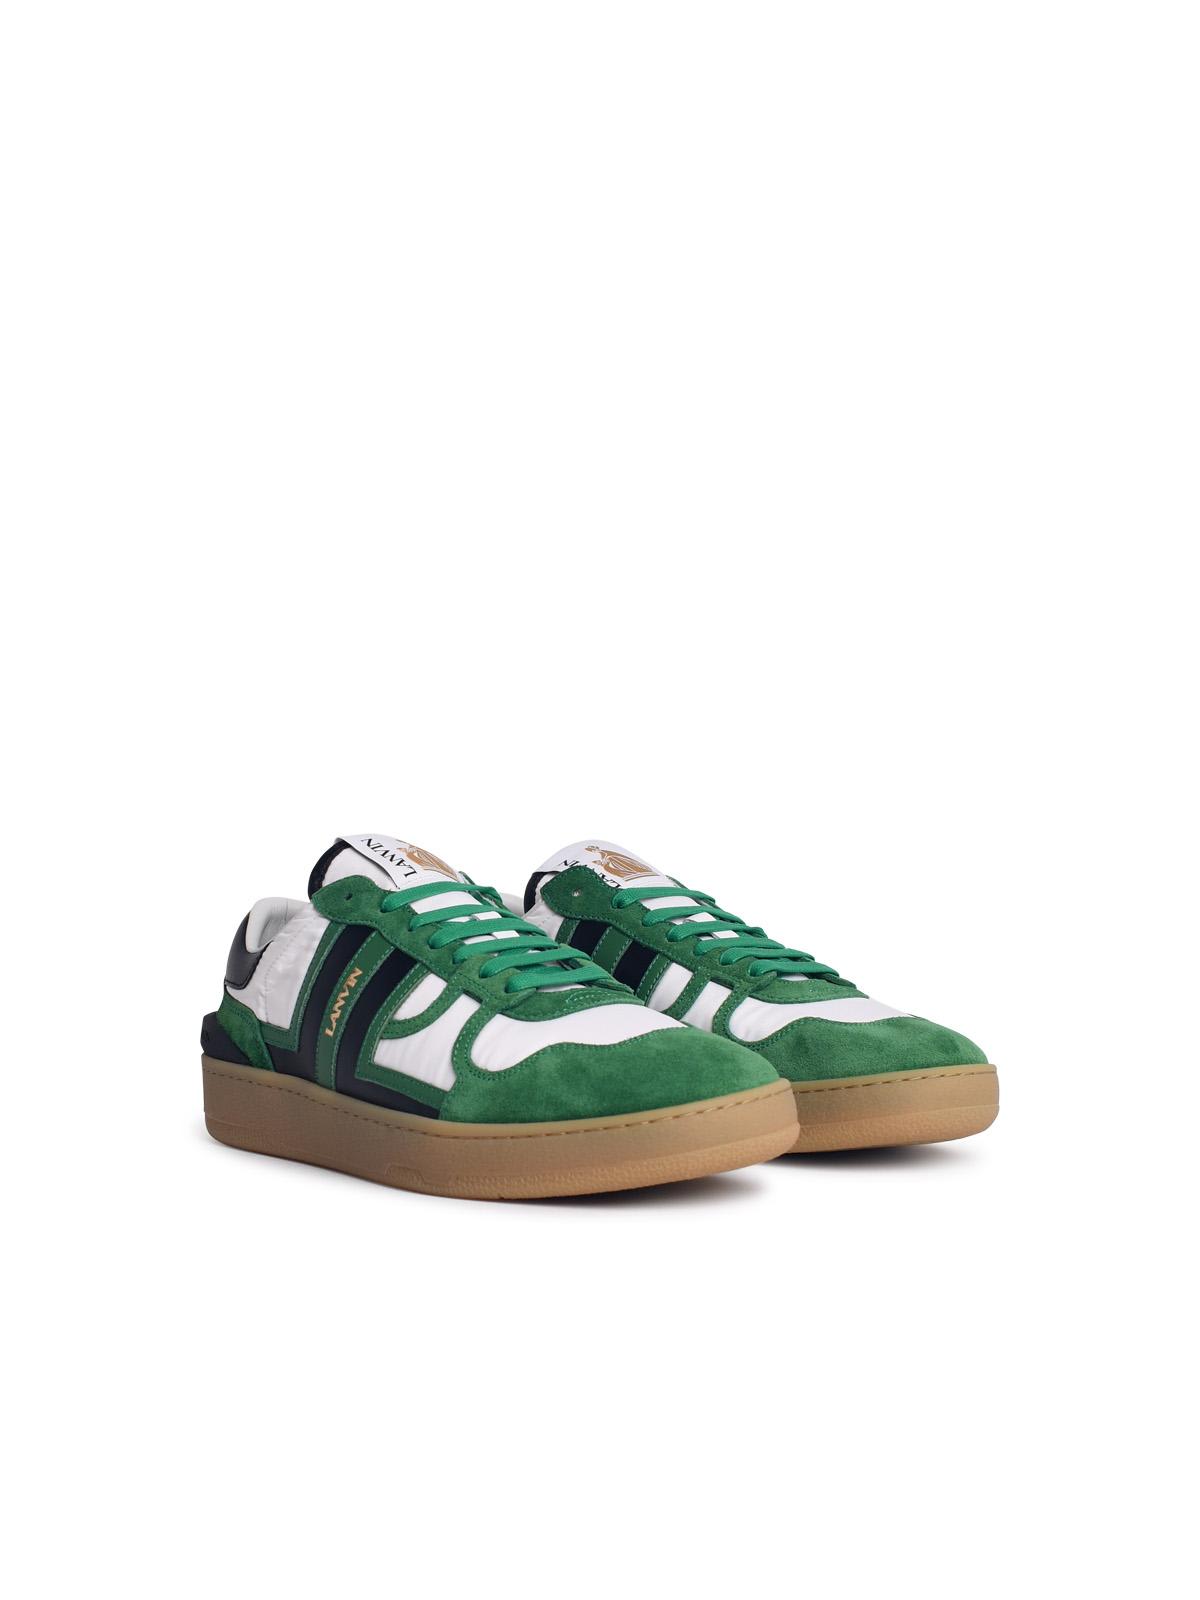 Lanvin Clay Green Leather Blend Sneakers